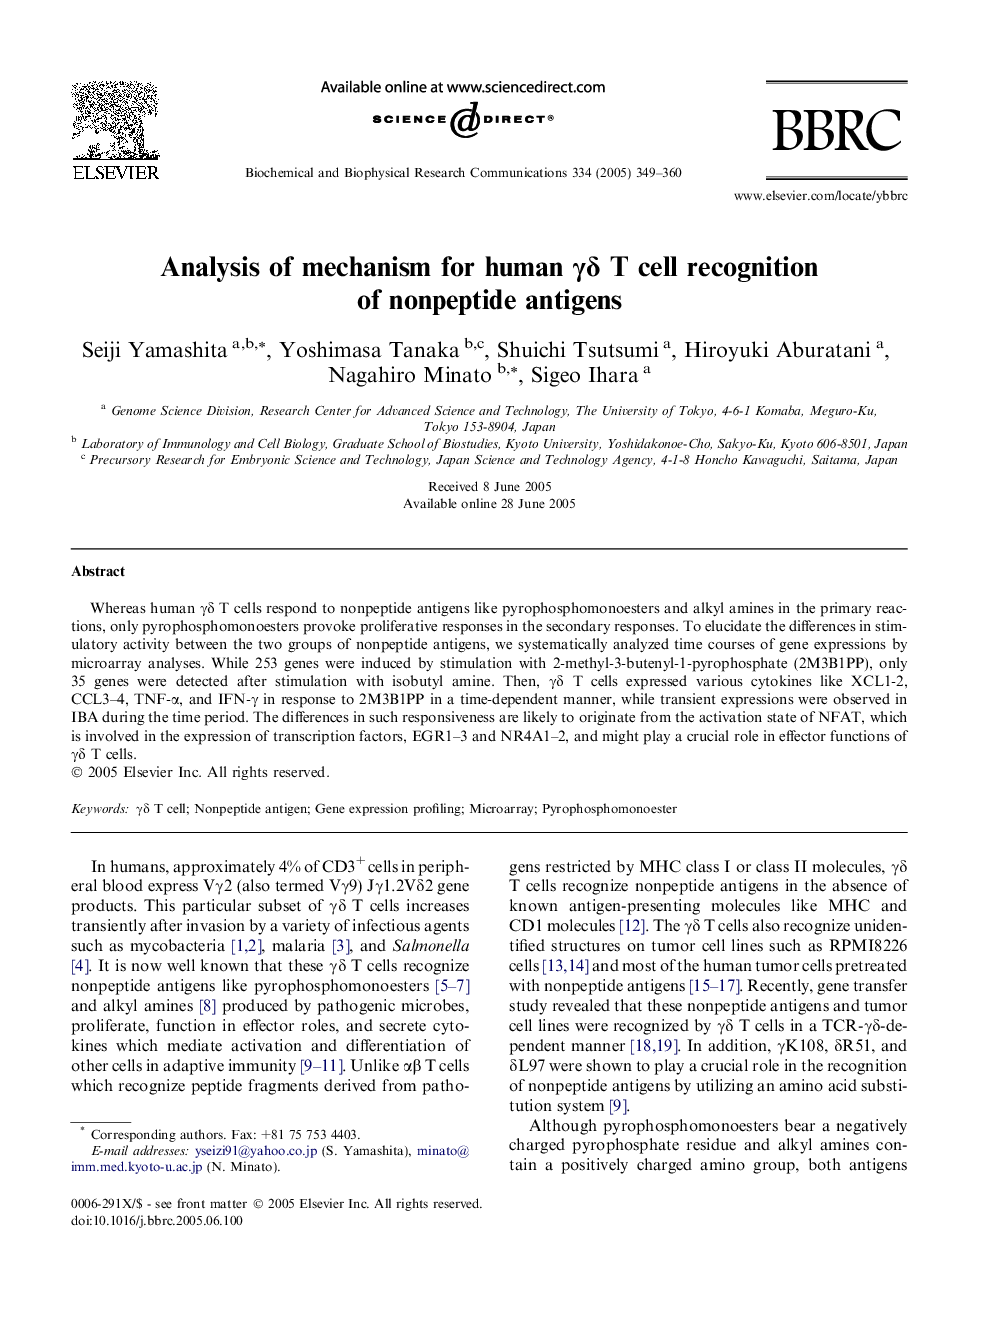 Analysis of mechanism for human Î³Î´ T cell recognition of nonpeptide antigens